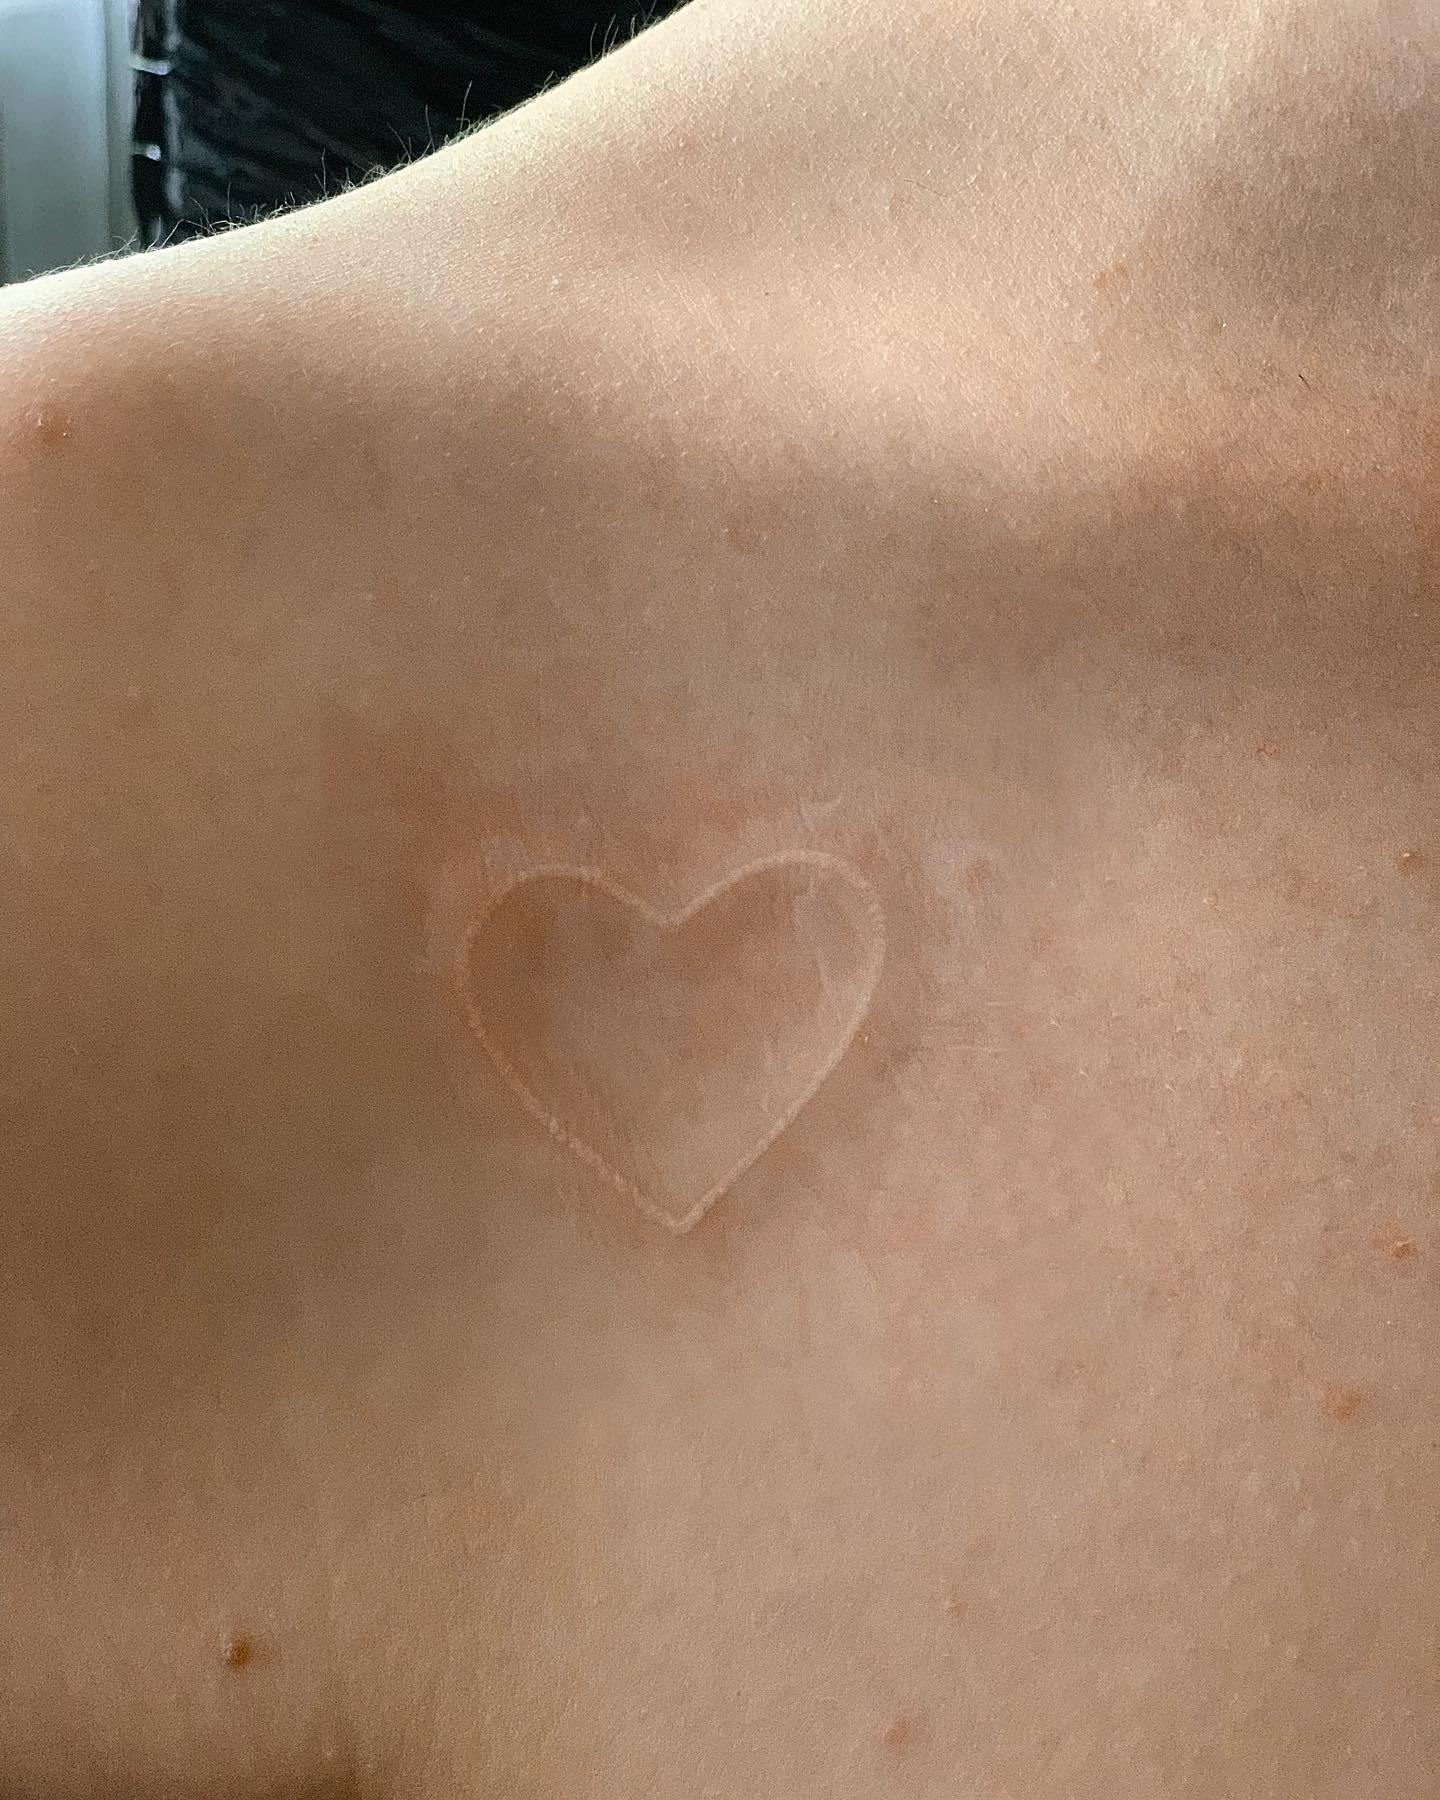 Wanna get a tattoo that is hard to recognize? White ink heart tattoo is for you then. The fact that it's white makes it stand out and gives it a cool contrast to the red of your blood when you get a tattoo. I also like that it's not as bold as other tattoos because it will fit into any outfit or style.